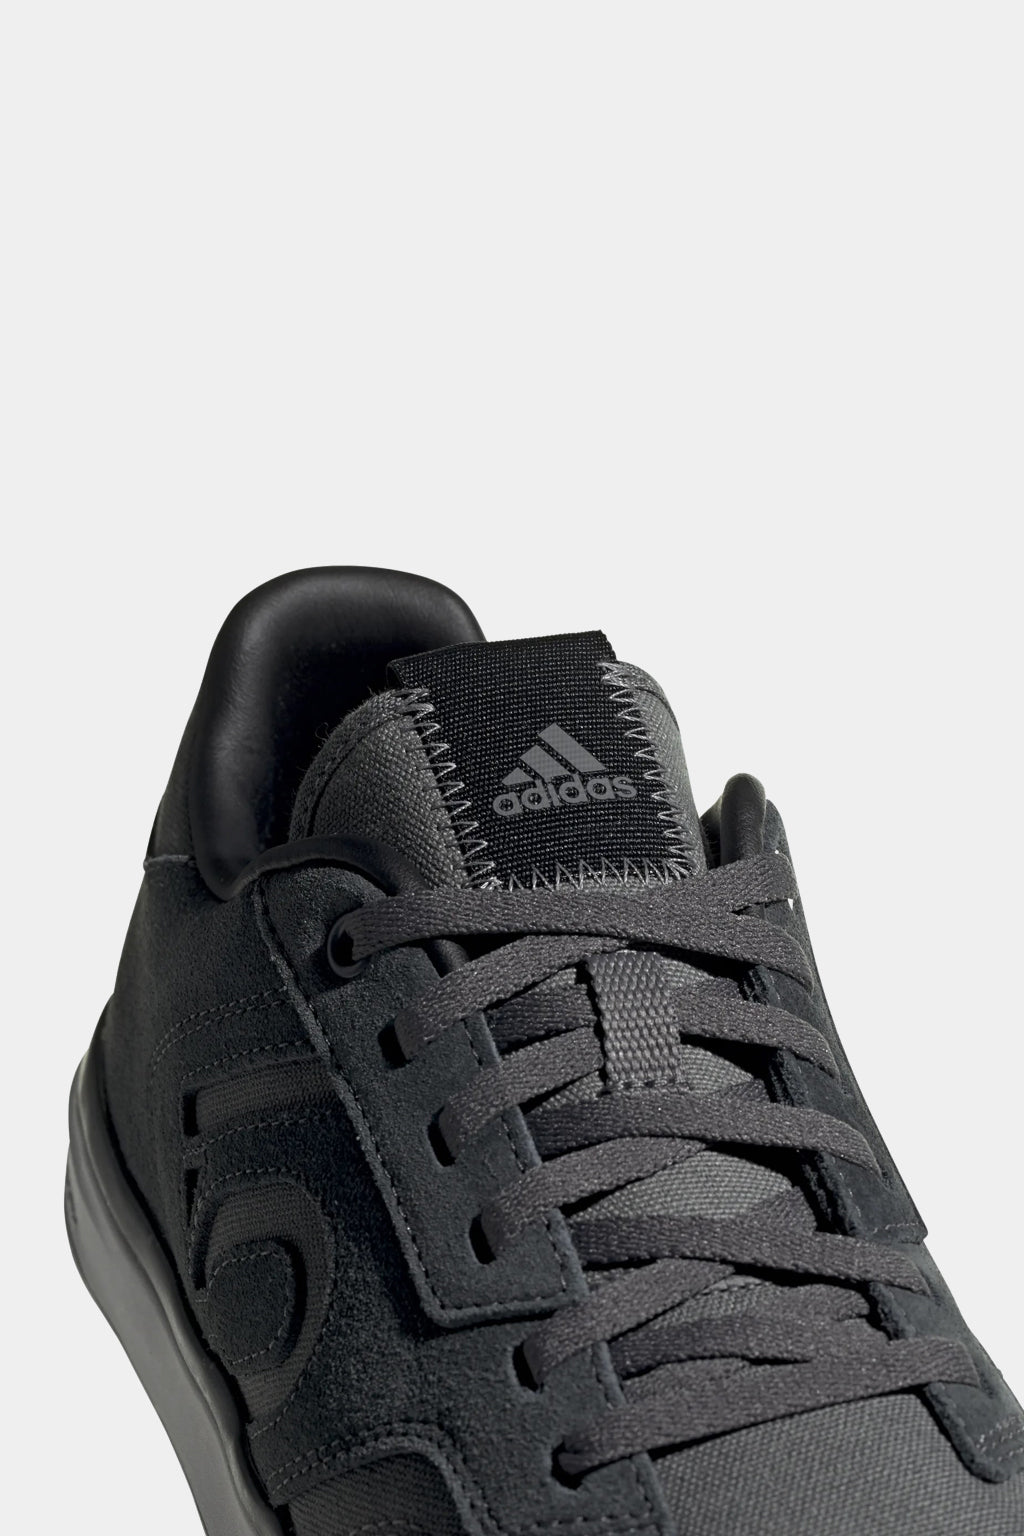 Adidas - Sleuth Men's Shoes